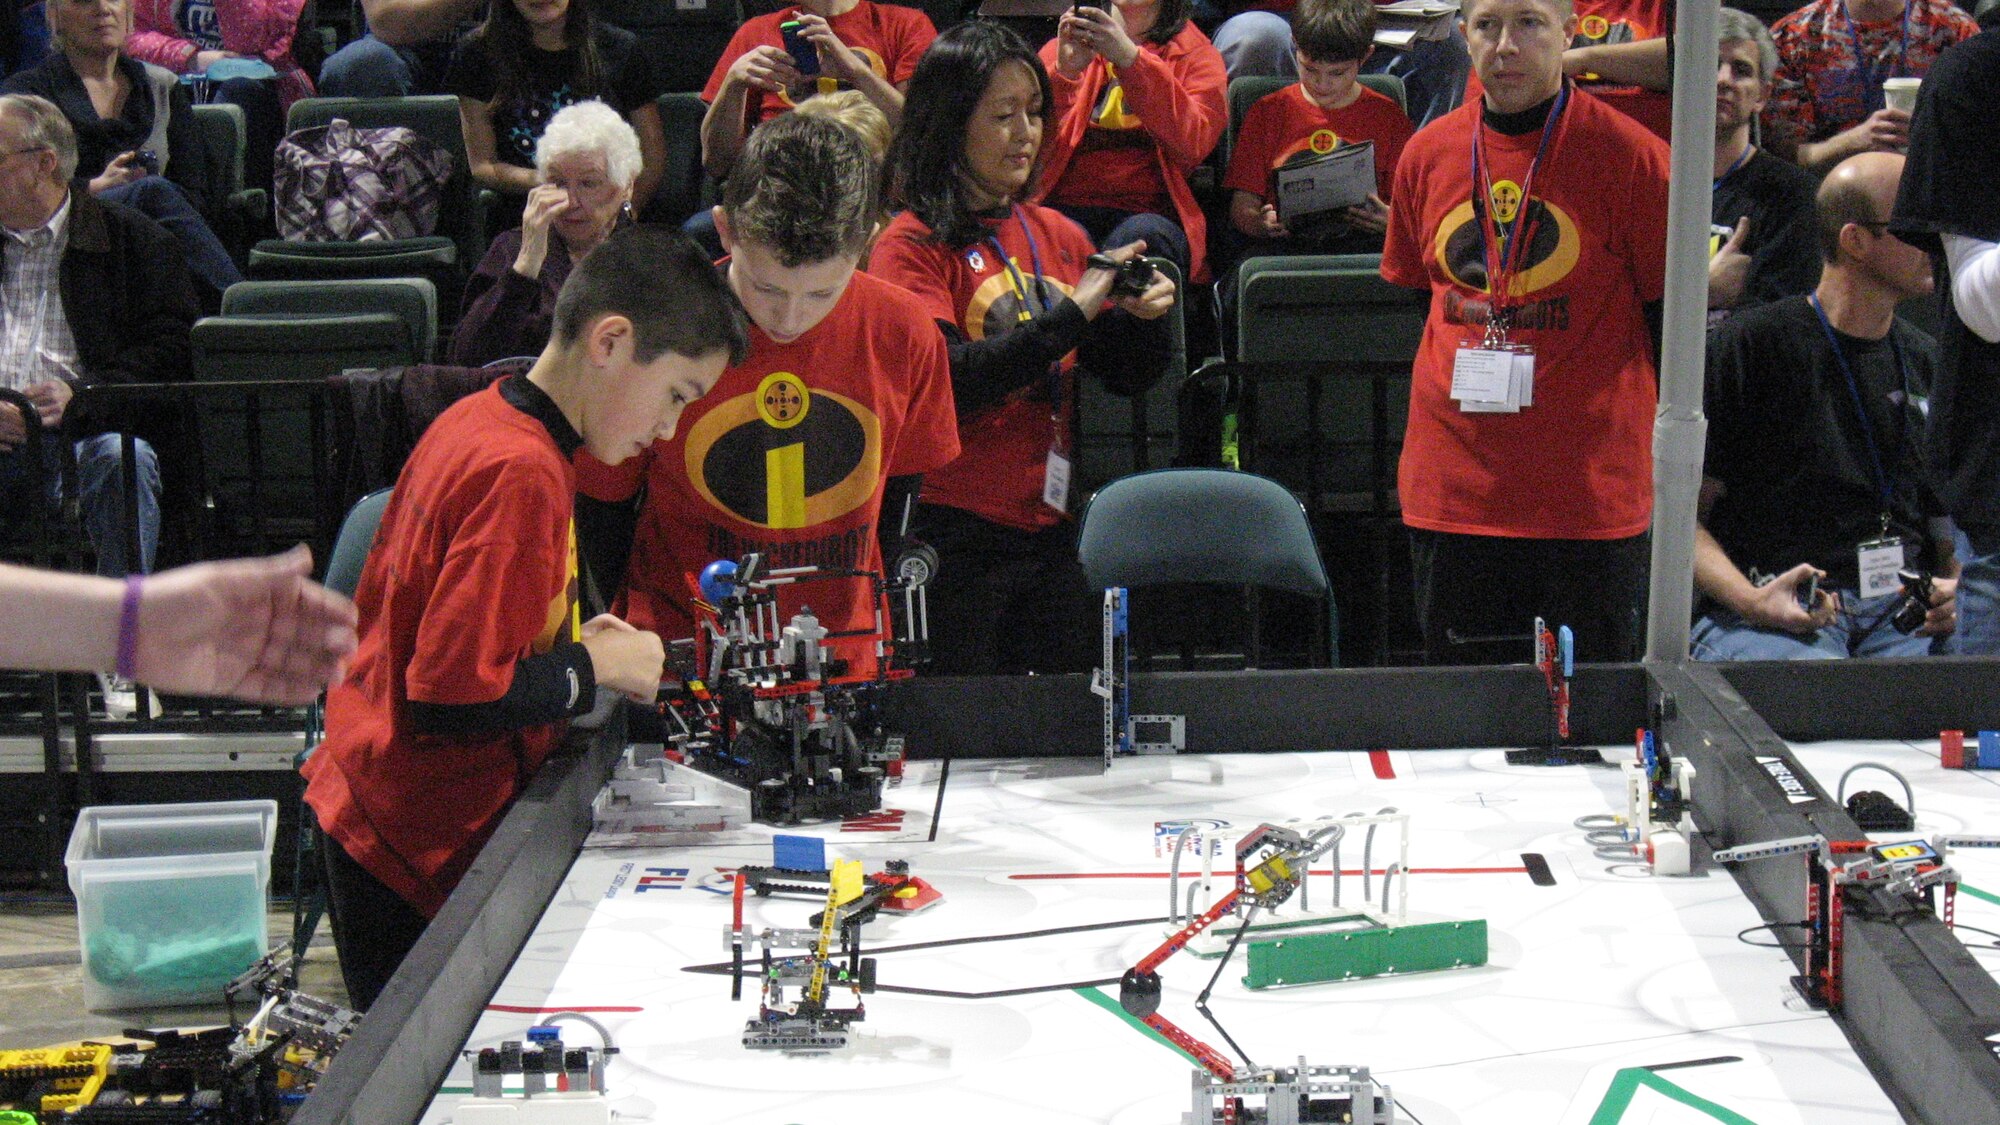 Second-place Champion’s Award – the “Incredibots” from Columbus – inspect their robotic entry during the FIRST LEGO League Ohio State Championship tournament at the Wright State University’s Nutter Center. The event hosted 50 top teams from around the state on Feb. 7-8. A team must have qualified from an Ohio district-level event to be invited to the state championship. (Air Force photo by Ted Theopolous)